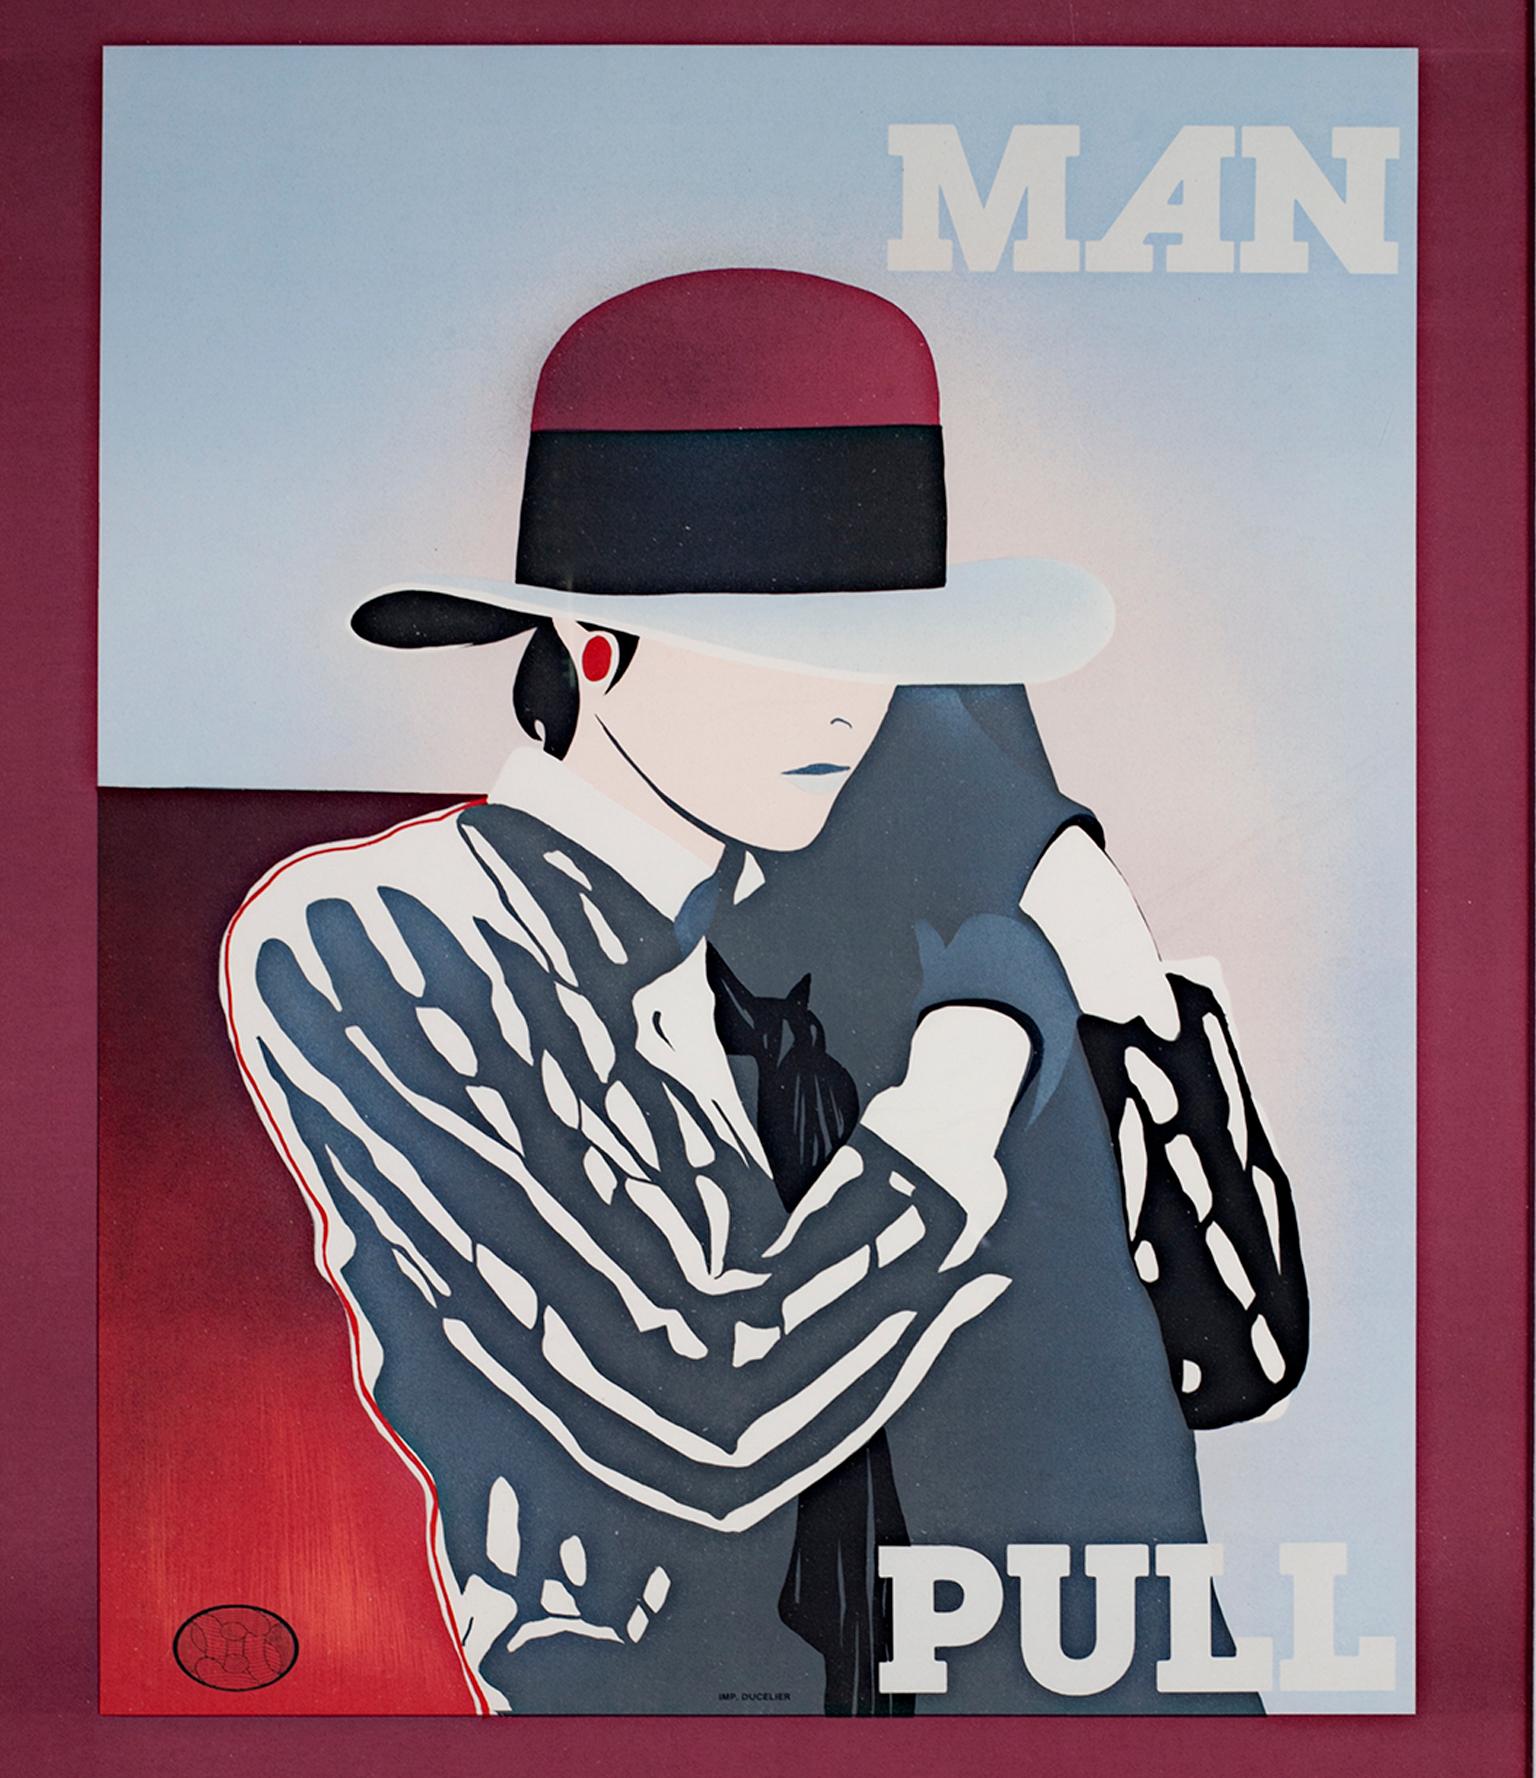 Unknown Figurative Print - "Man Pull, " Original Color Lithograph Poster signed by Ducelier